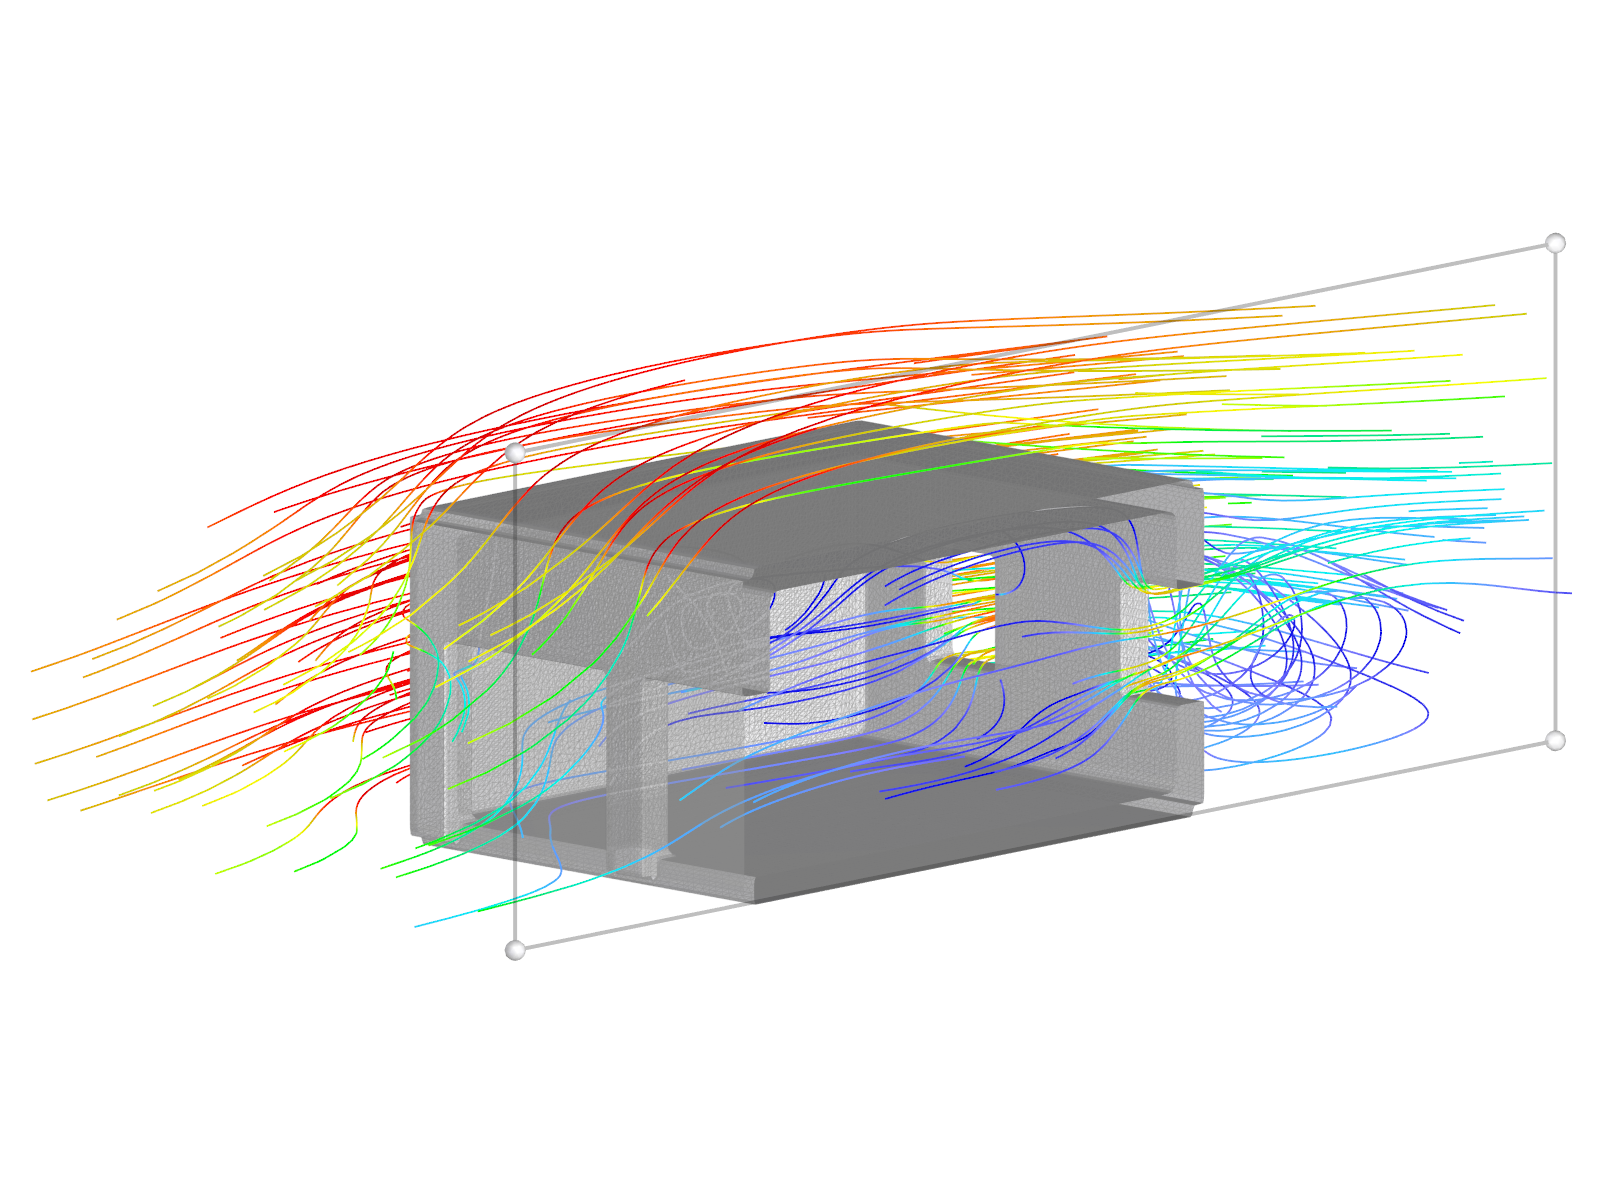 Garage Model with Partially Wind-Permeable Surface